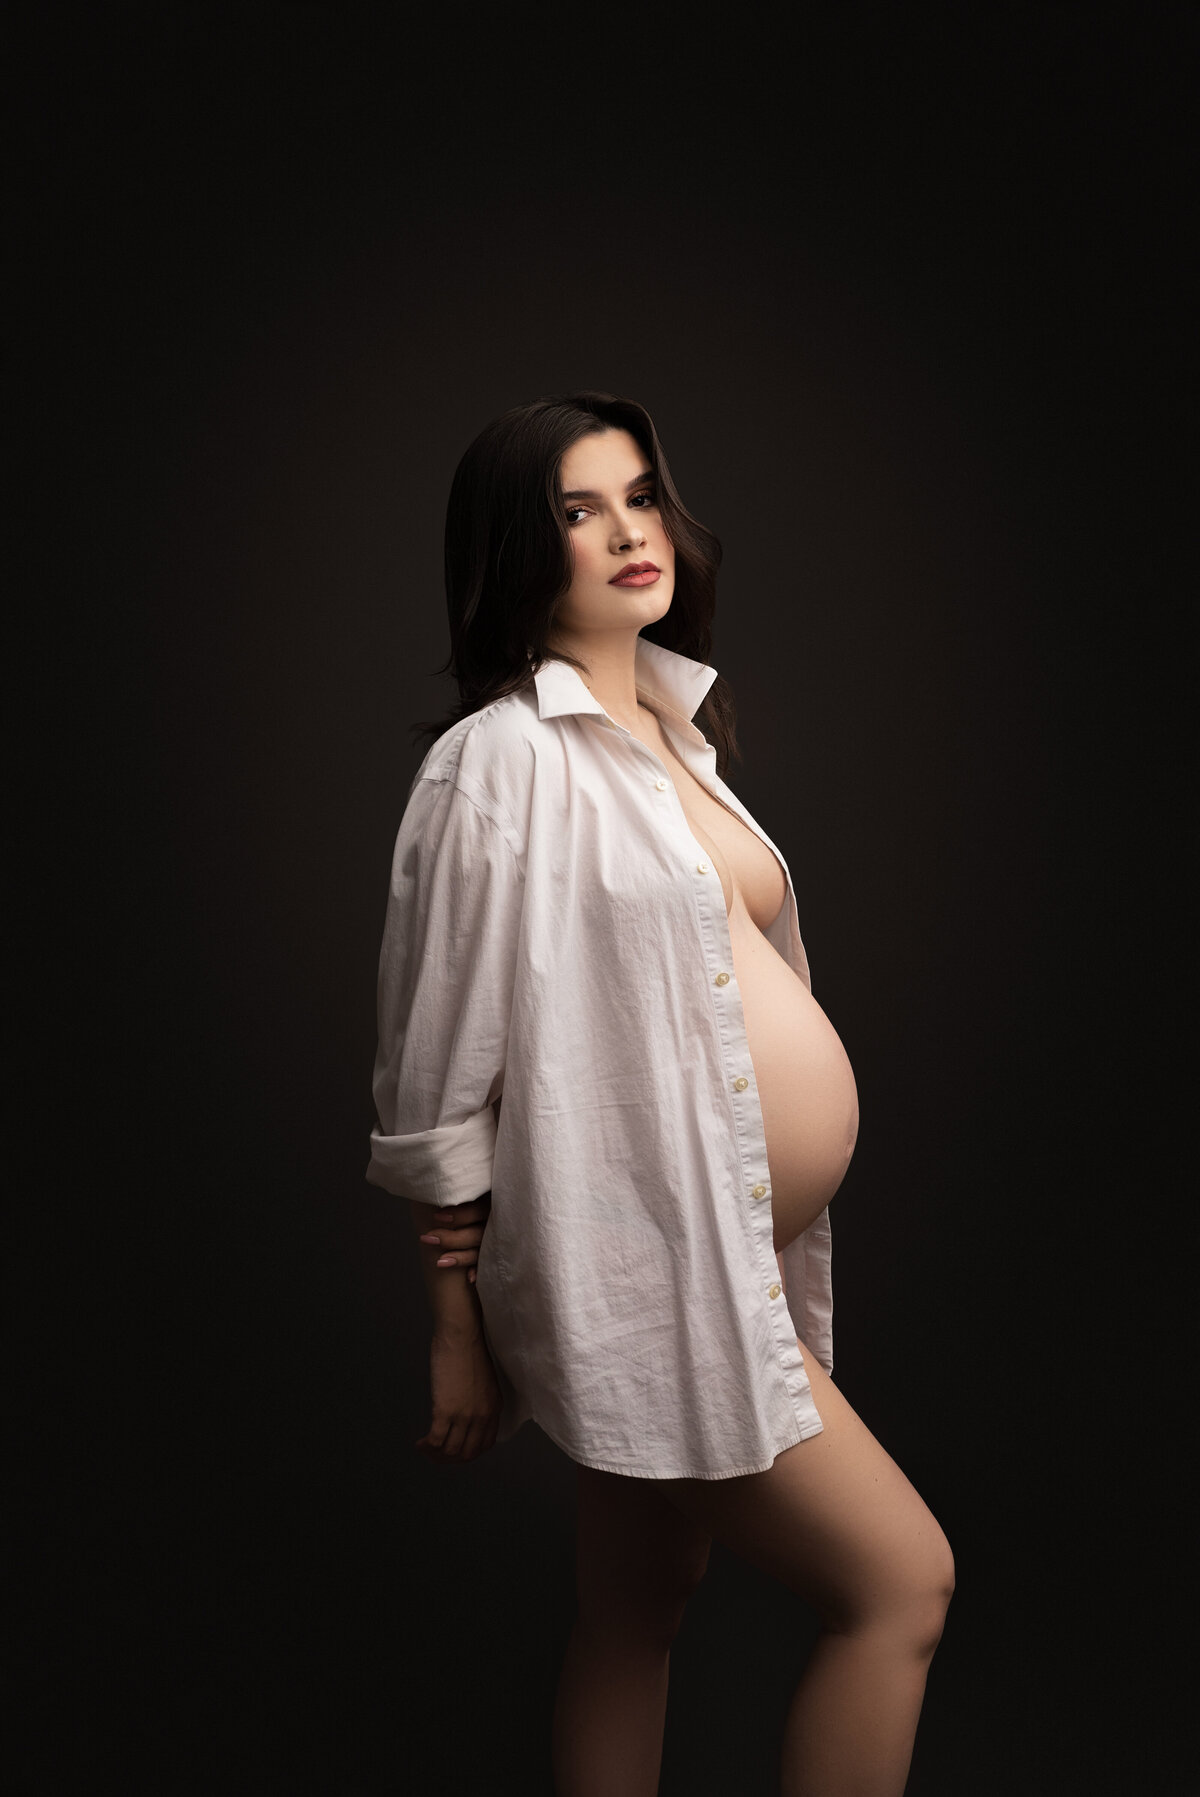 A woman with long dark hair and bold red lipstick stands angled to the camera for a fine art maternity photoshoot in Swedesboro, NJ. She confidently wears an unbuttoned dress shirt, revealing her beautiful baby bump. With an alluring glance over her shoulder towards the camera, she exudes both elegance and strength, creating a bold and memorable image captured by the best New Jersey maternity photographer, Katie Marshall.